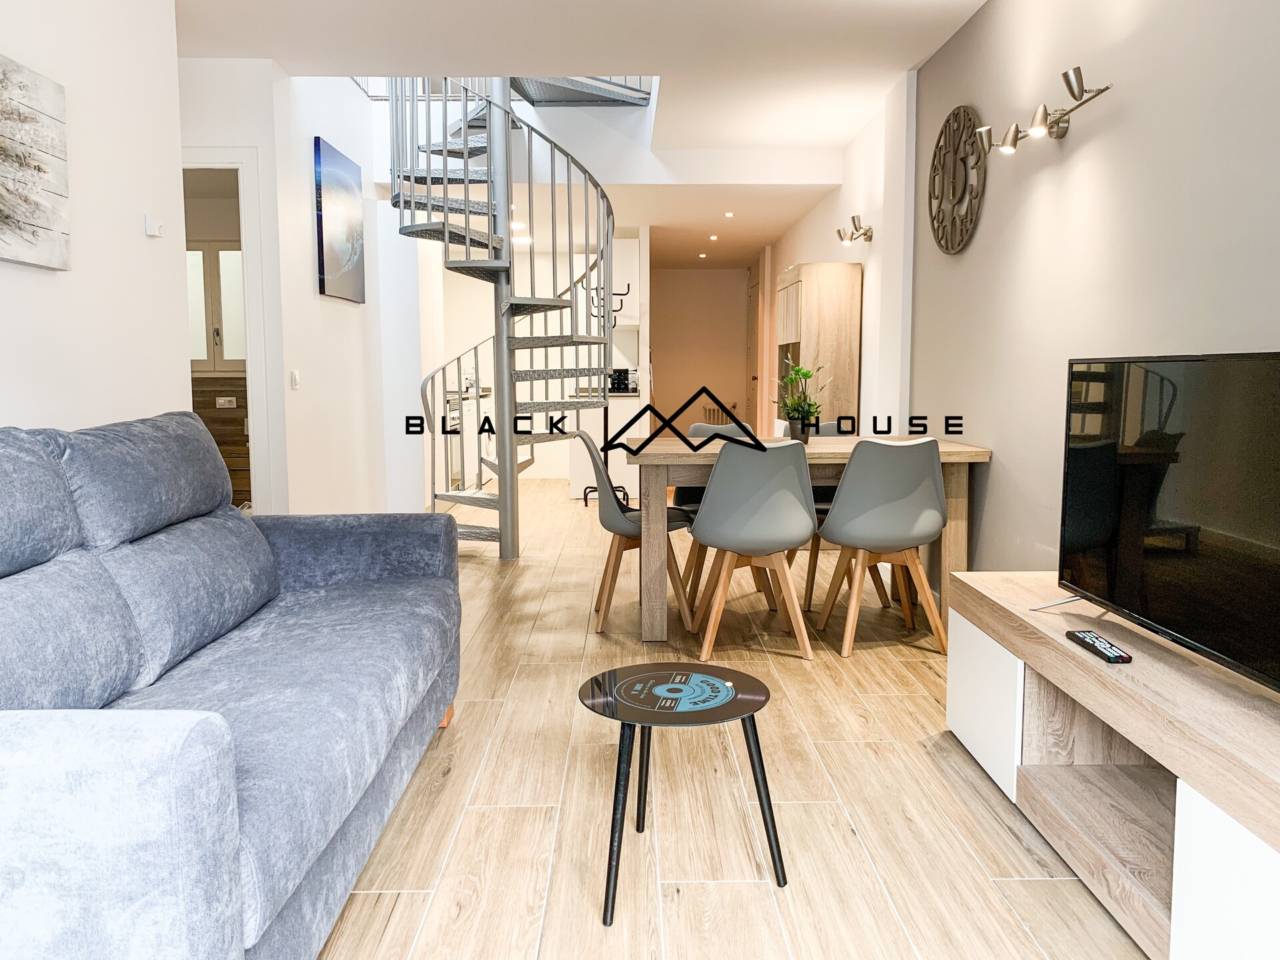 Set of 4 renovated apartments, furnished and equipped for sale in the center of Andorra la Vella.